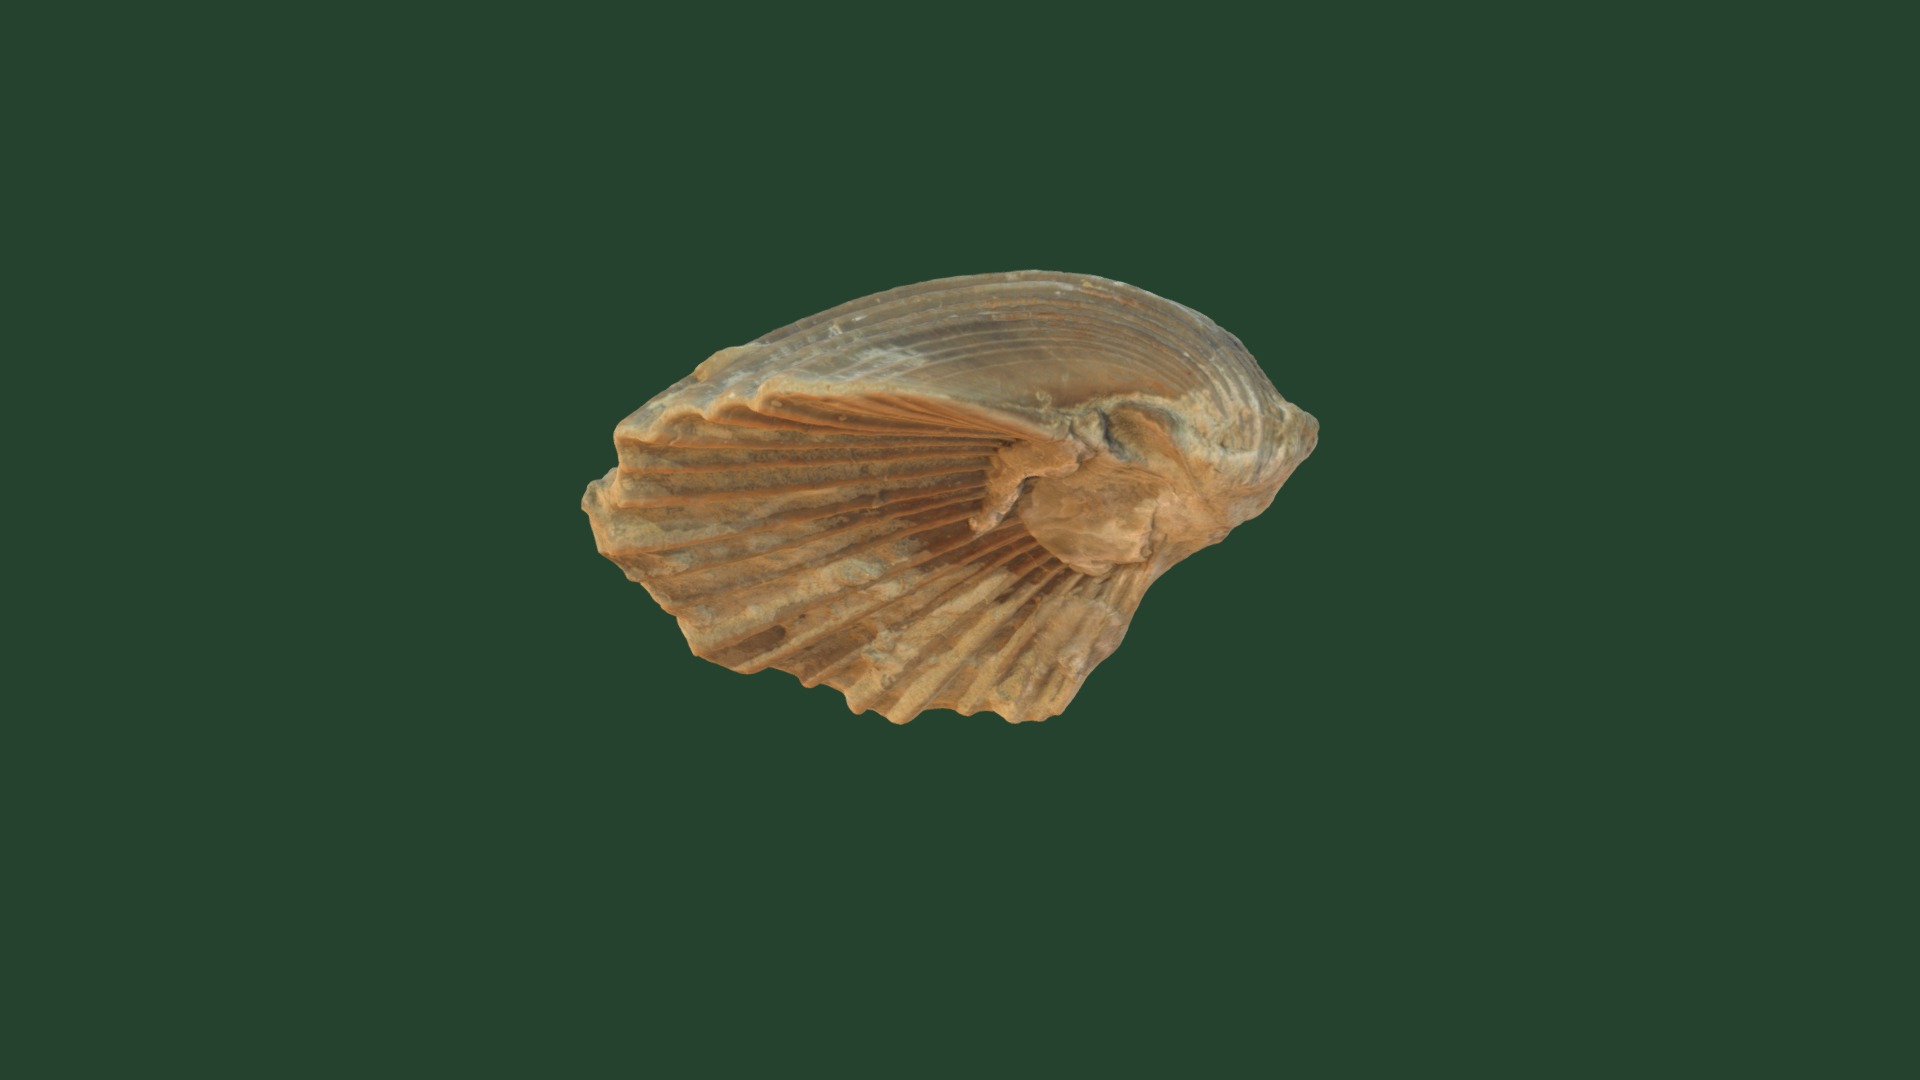 3D model Neithea sp. 8039 - This is a 3D model of the Neithea sp. 8039. The 3D model is about a close-up of a shell.